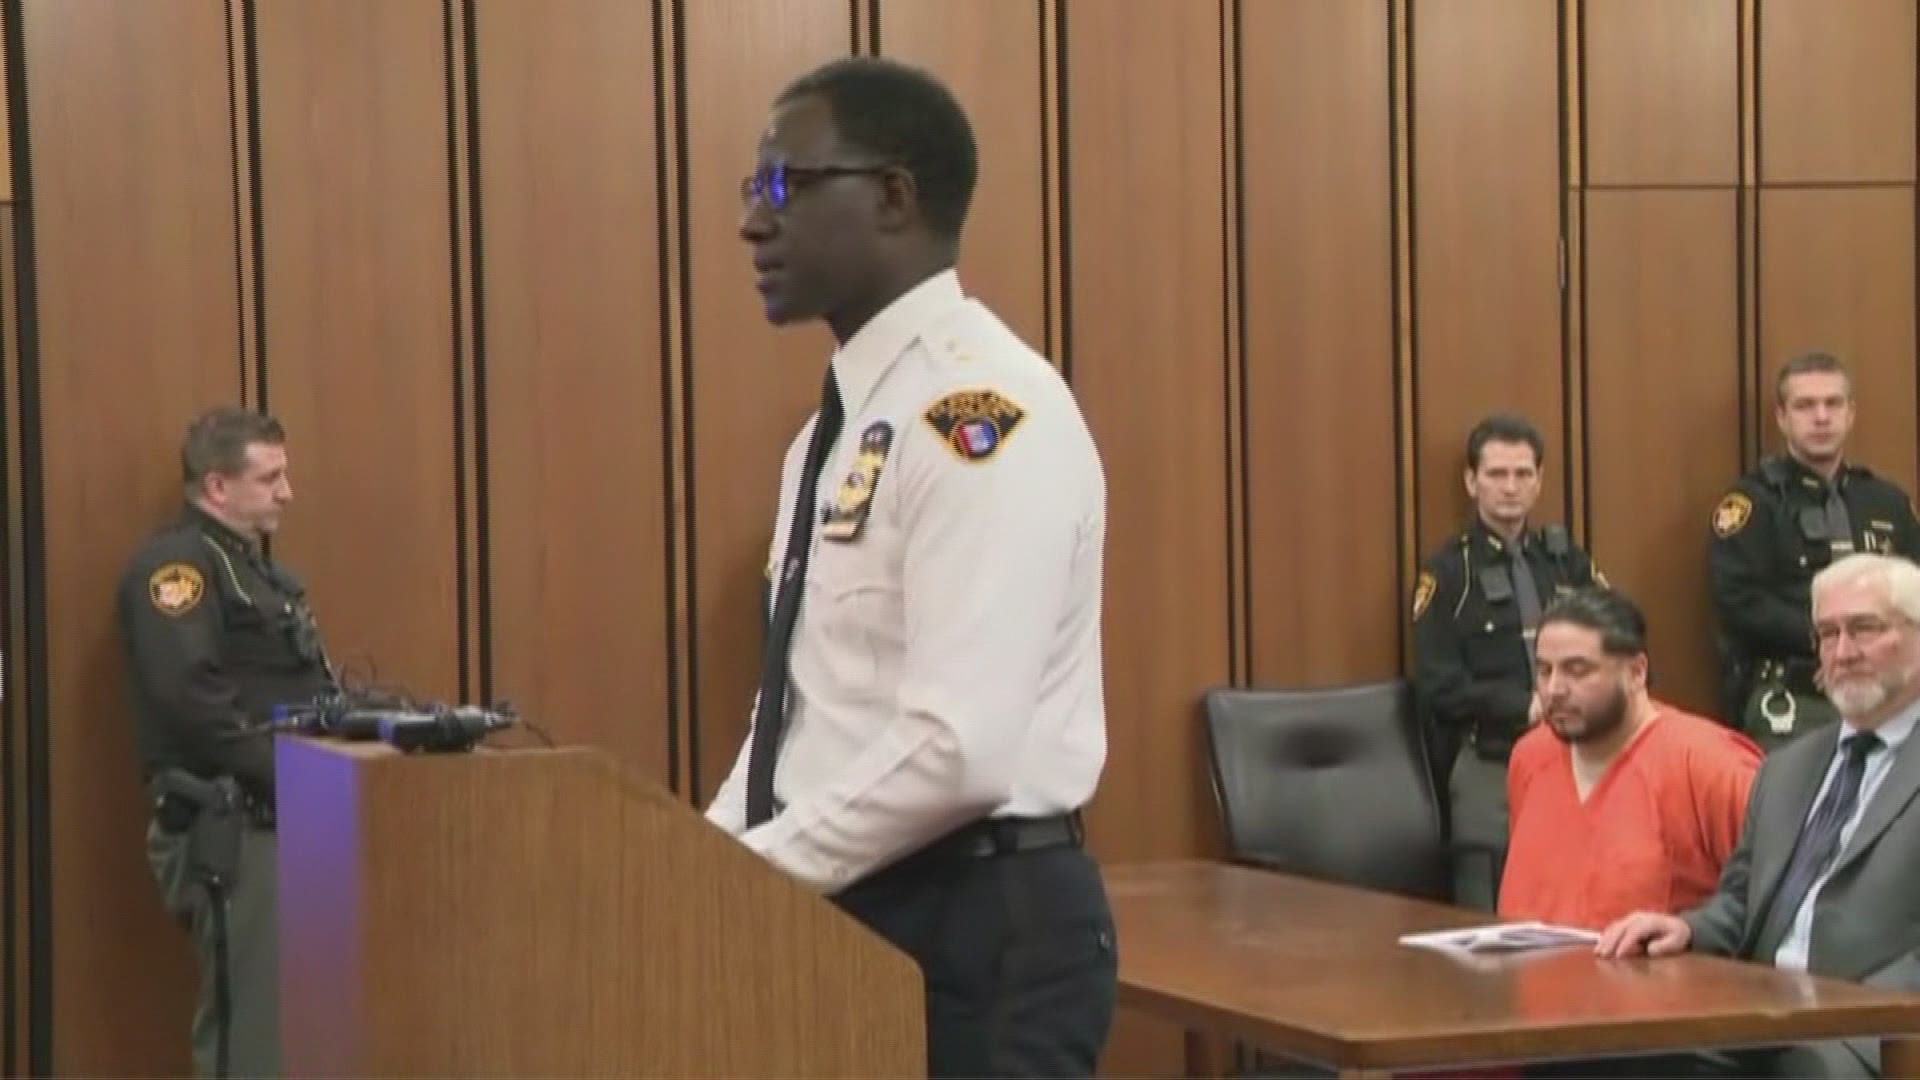 Nov. 16, 2018: Cleveland Police Chief Calvin Williams spoke through tears before a judge sentenced Israel Alvarez to 12 years behind bars for the January 2017 hit-and-run death of officer David Fahey.